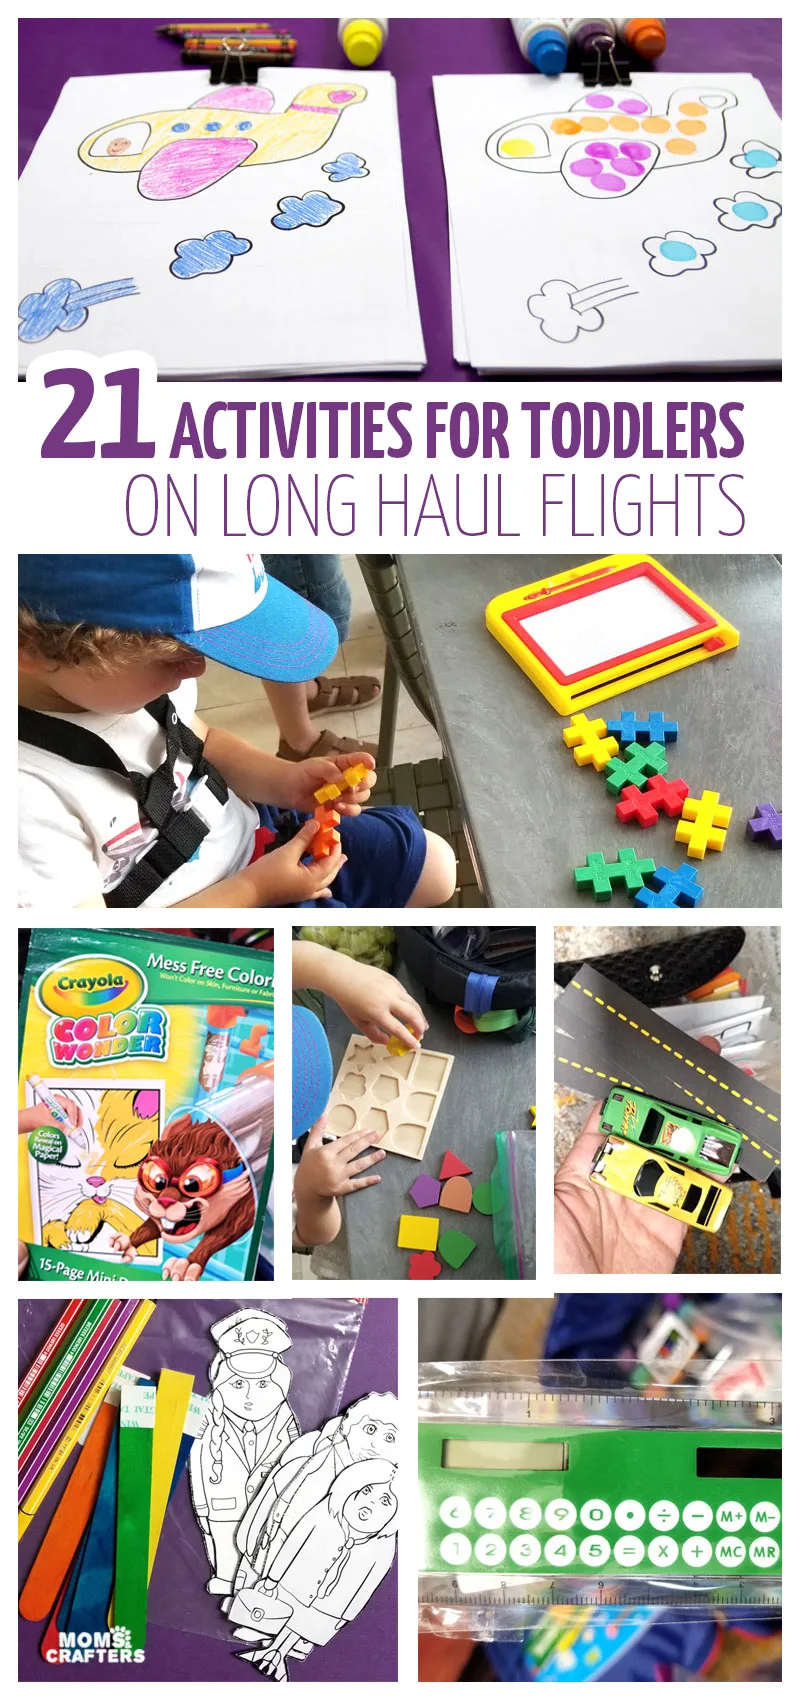 Click for some activities and tips for travel with toddlers on a plane. This carry on packing list for 2 year olds and 3 year olds is perfect for long flights and include many tips for keeping them happy.